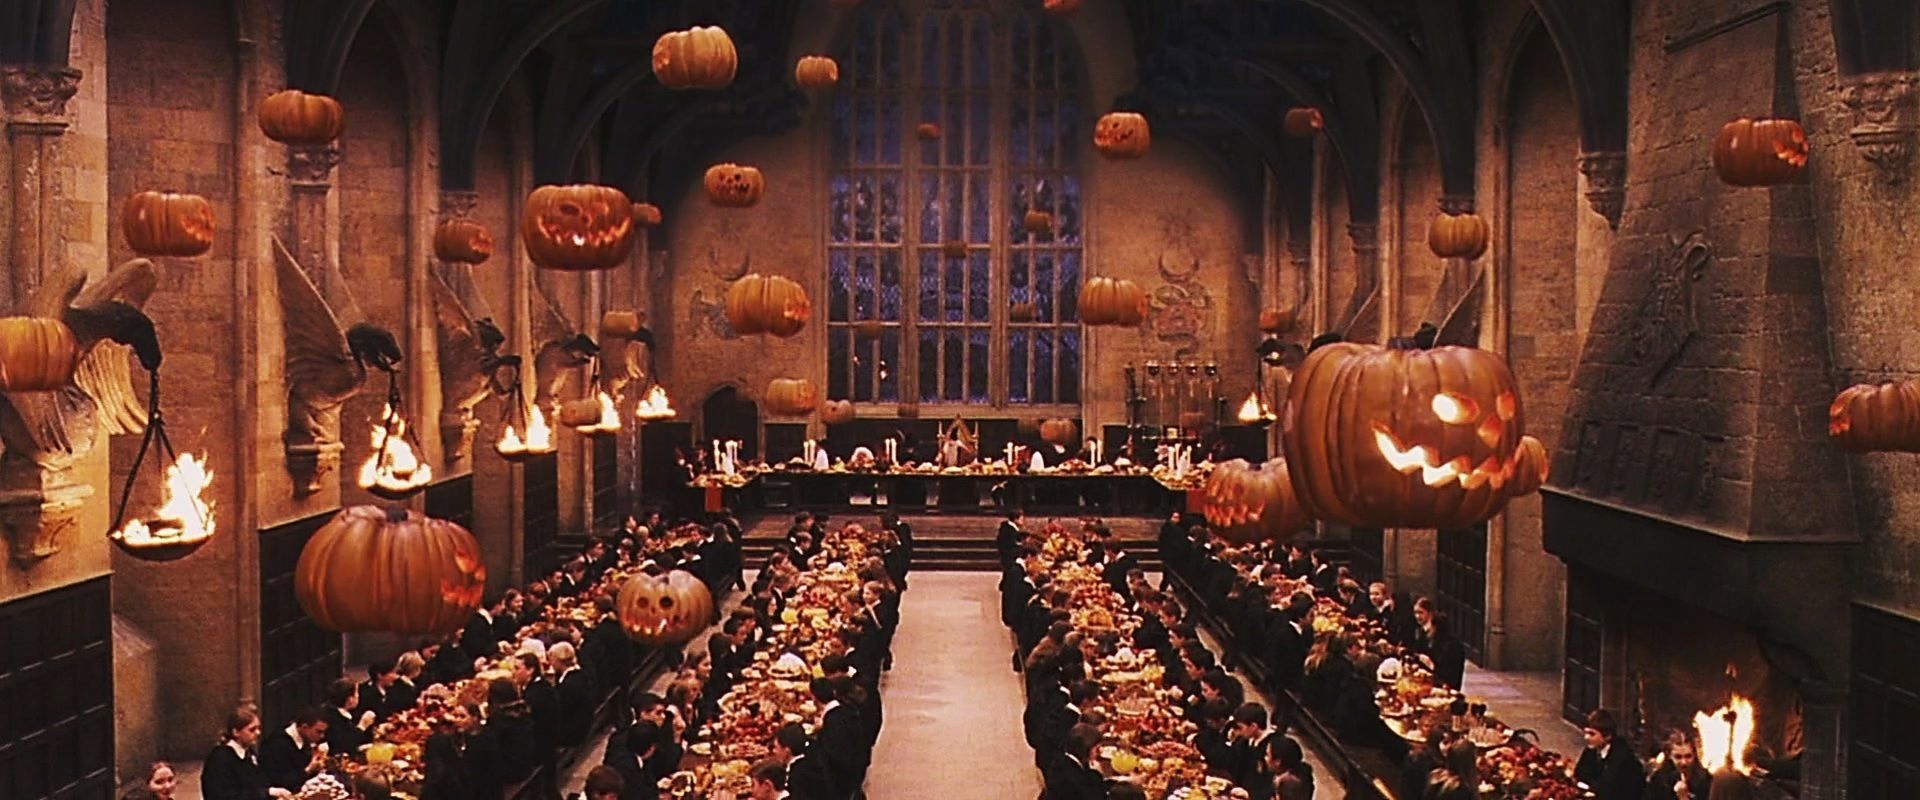 The Great Hall is decorated with jack-o'-lanterns and torches for the Halloween feast. - Halloween desktop